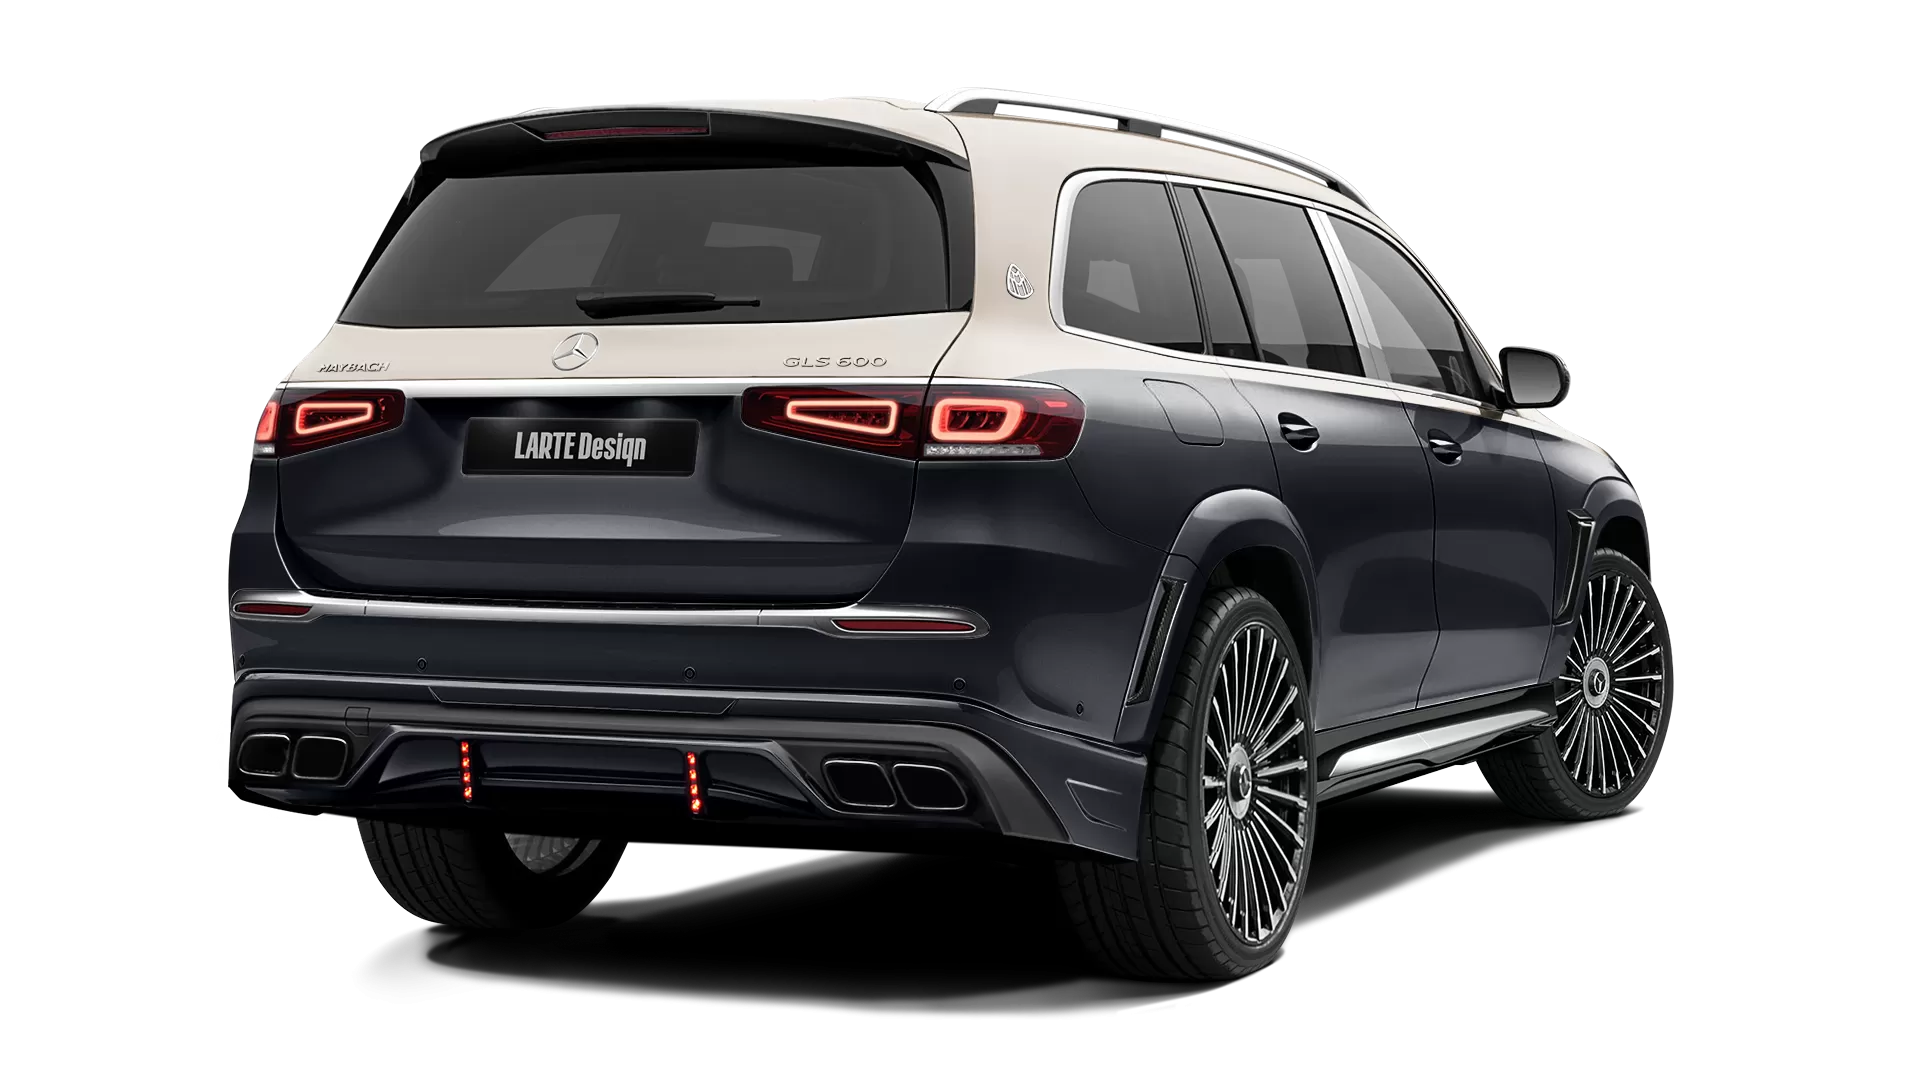 Mercedes Maybach GLS 600 with painted body kit: rear view shown in Obsidian Black & Kalahari Gold